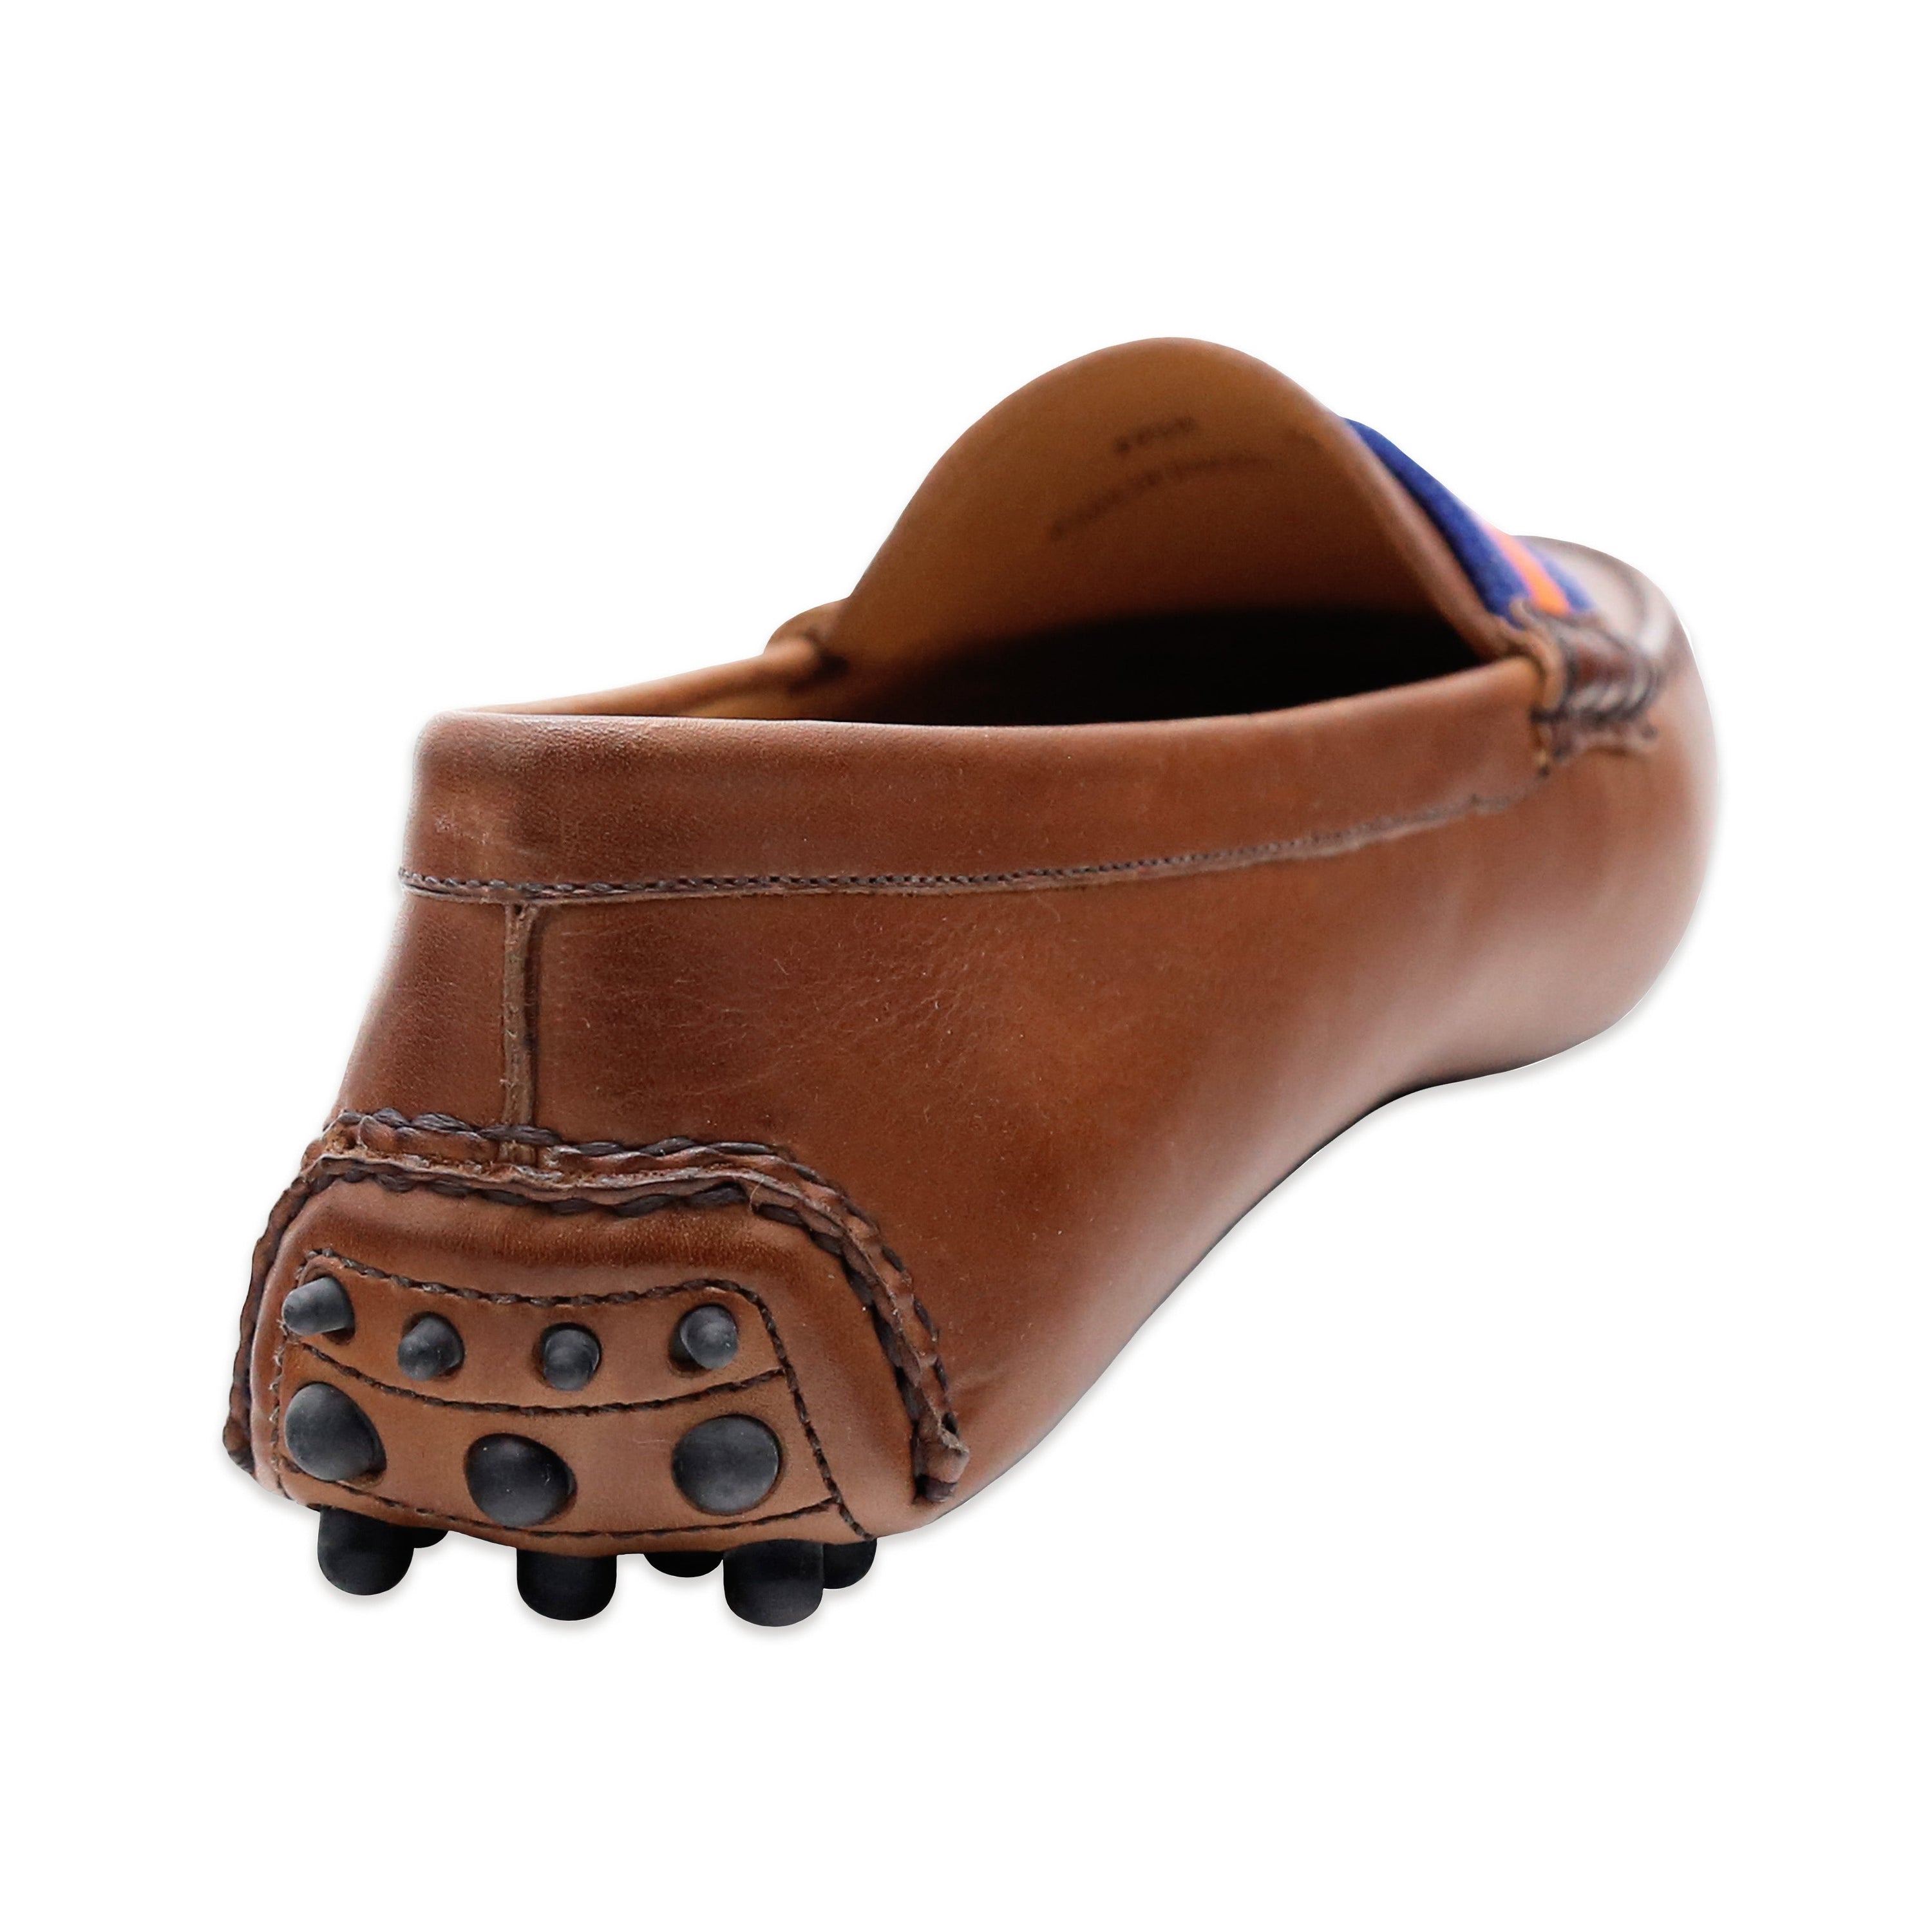 Georgetown Surcingle Driving Shoes (Classic Navy-Grey) (Chestnut Leather - Logo)